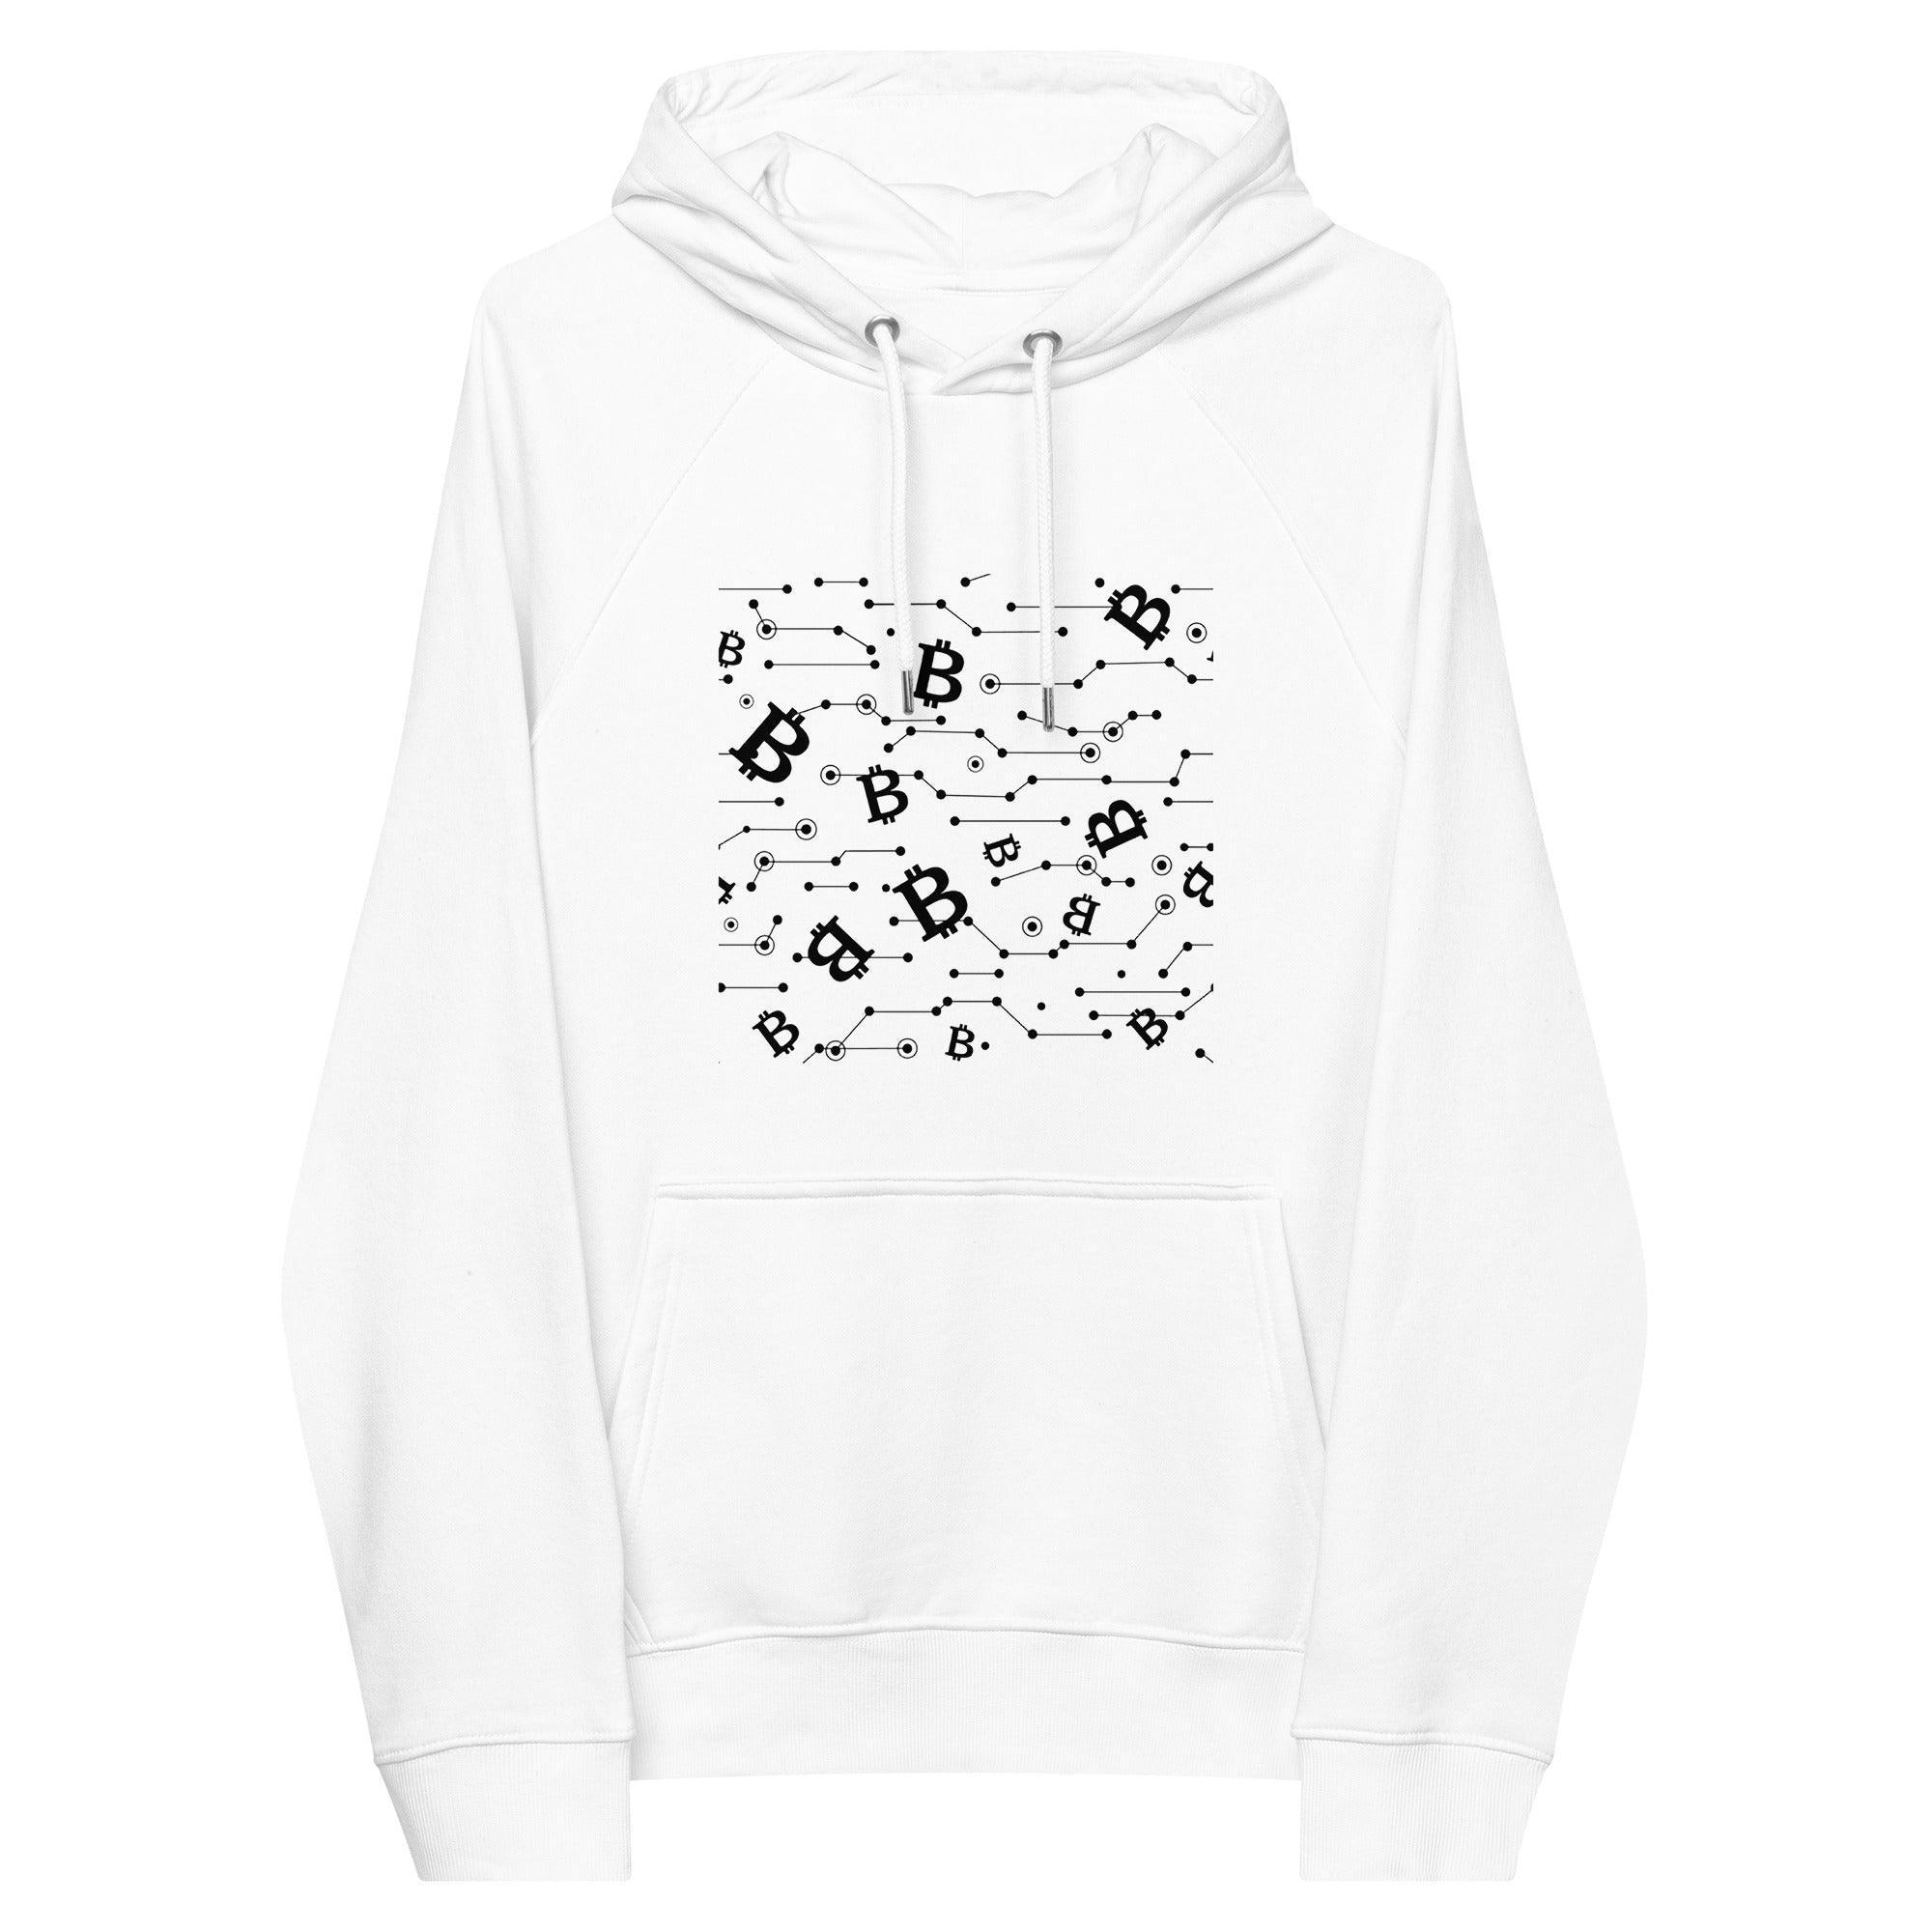 Bitcoin | Blockchain Pullover Hoodie - InvestmenTees